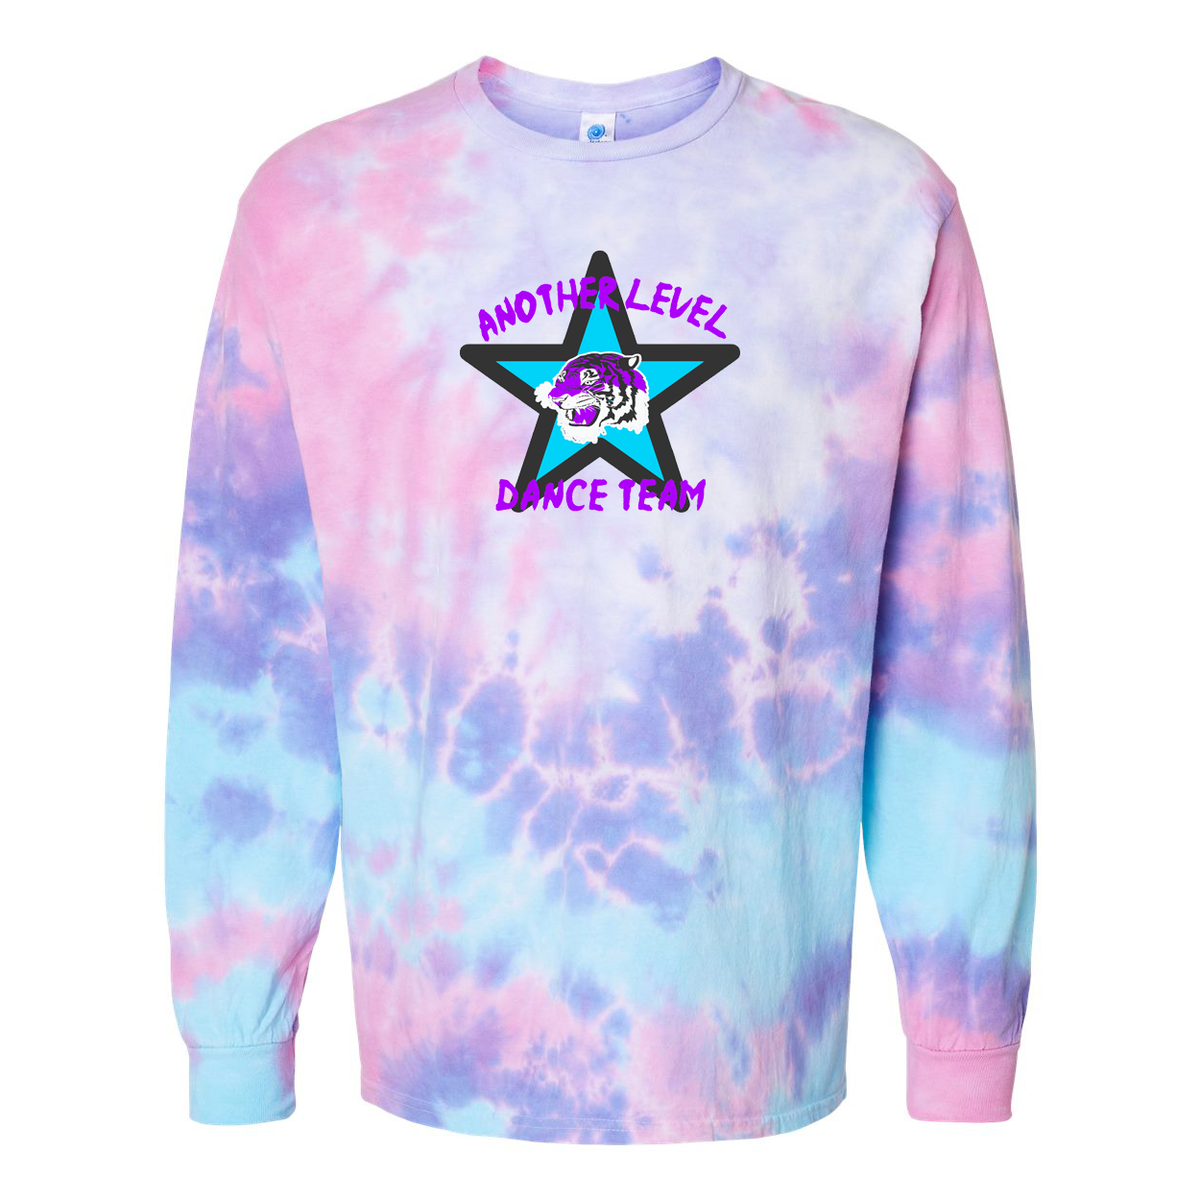 Another Level Dance Team Tie-Dyed Long Sleeve T-Shirt